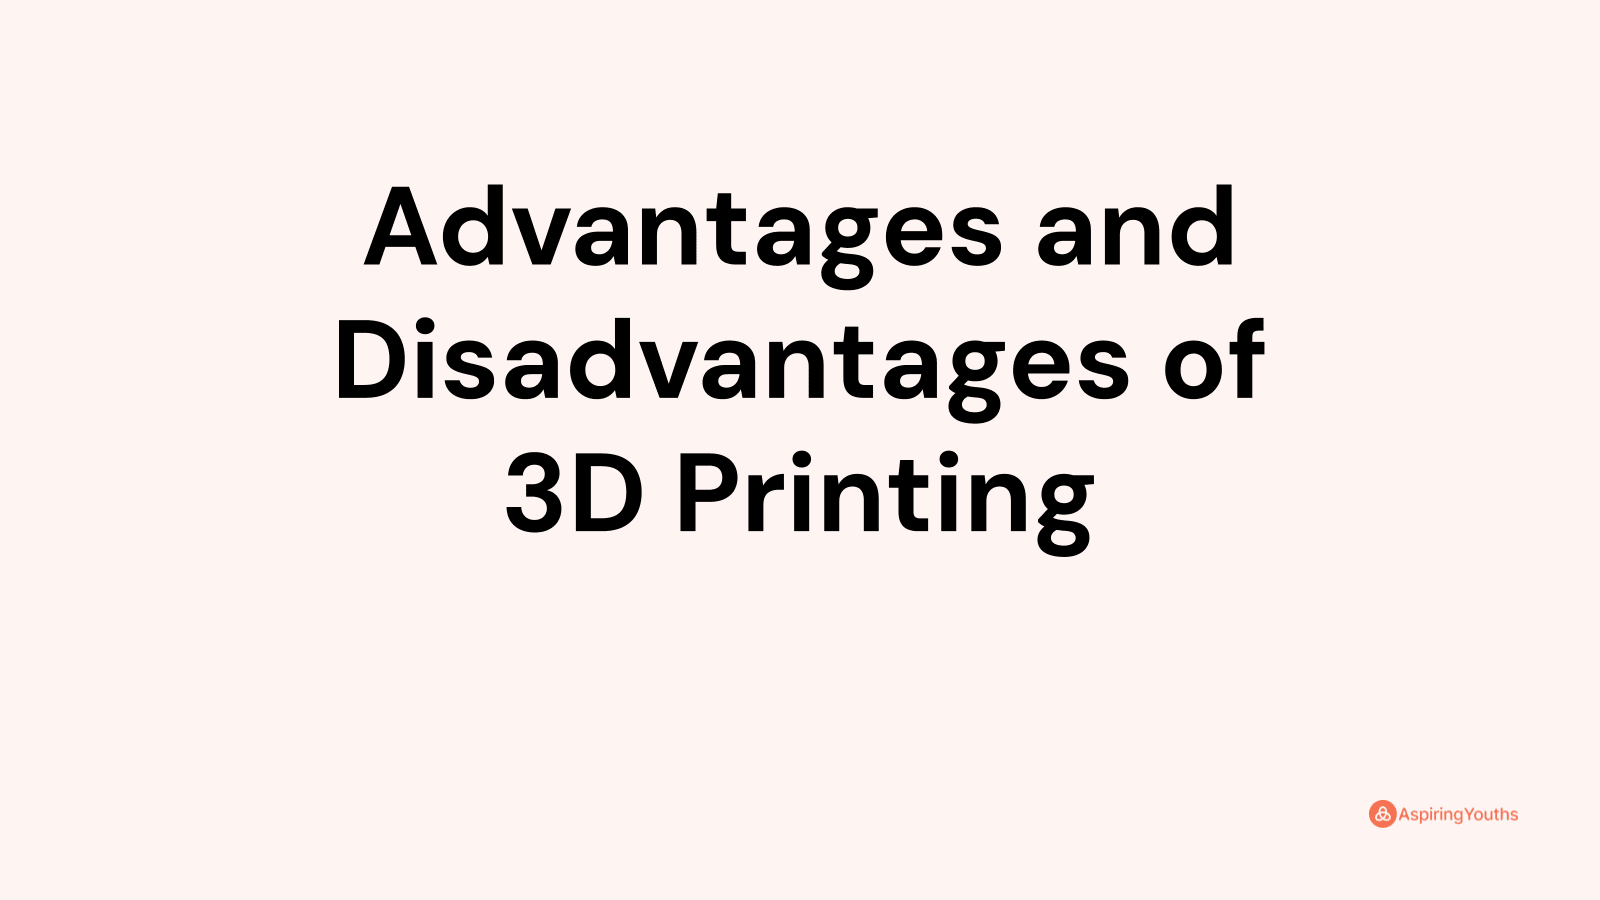 Advantages and disadvantages of 3D Printing